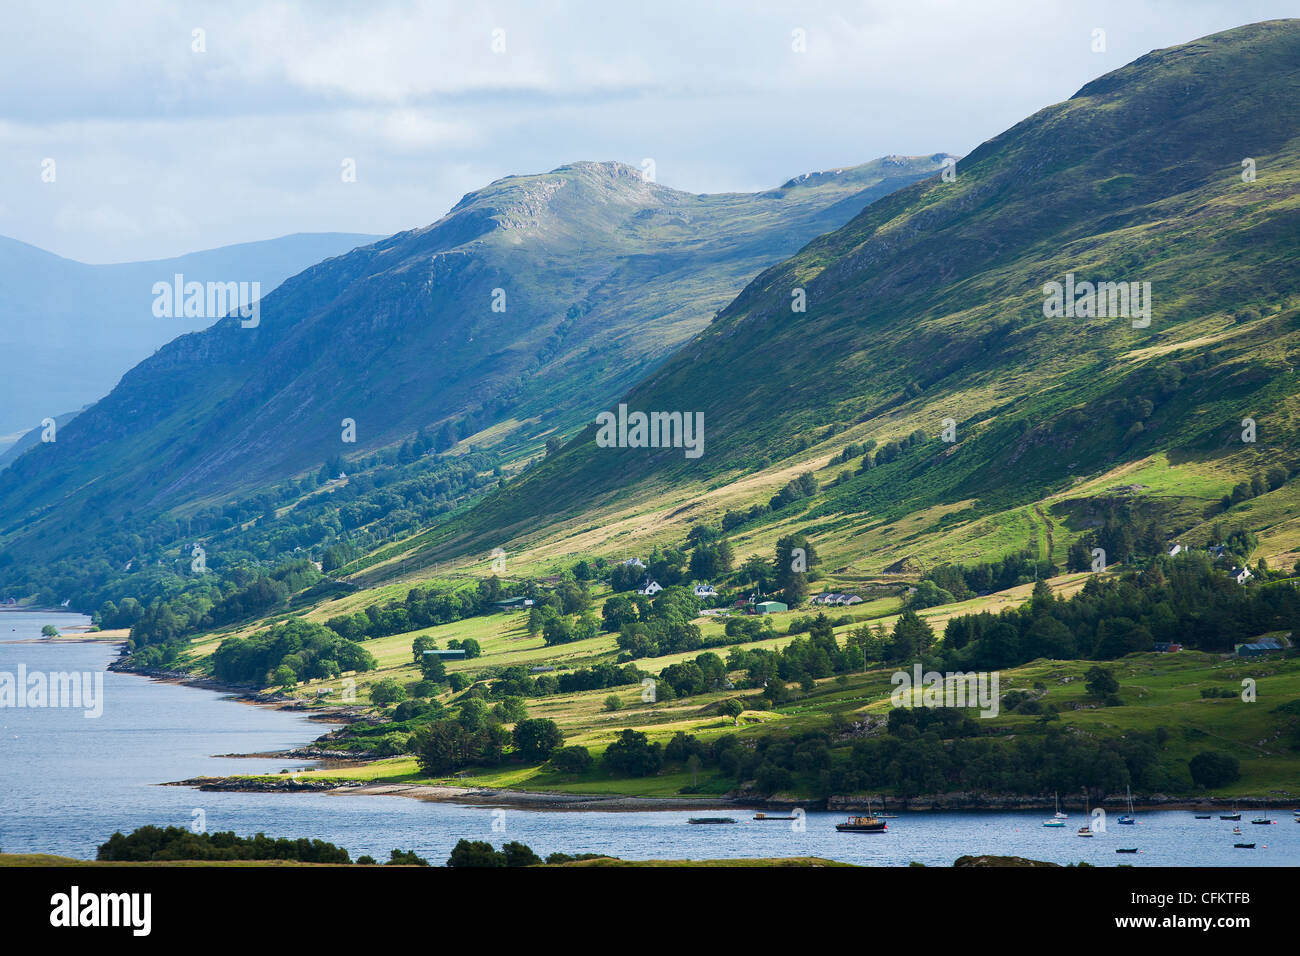 A view over Ullapool, looking up Loch Broom in Western Scotland with mountains in the background. Stock Photo